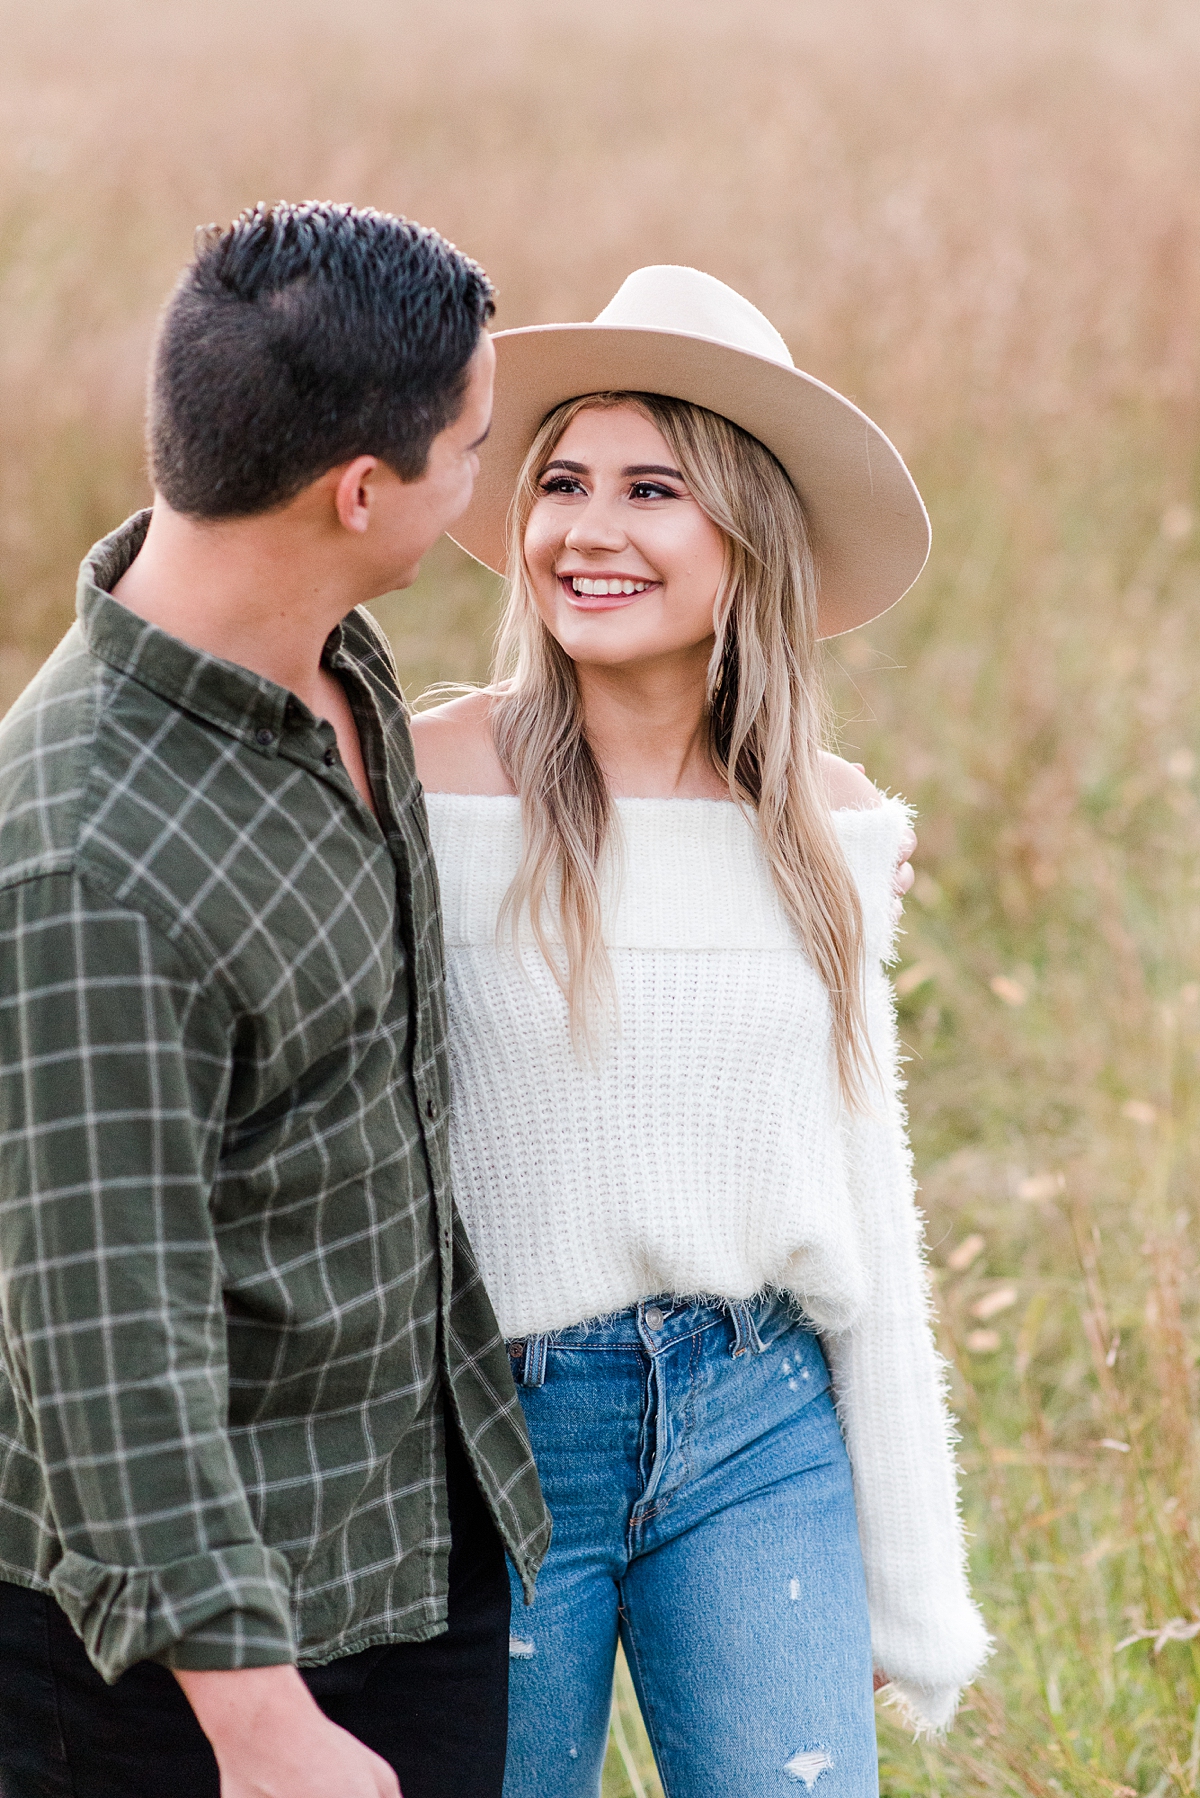 Stylish Engagement Outfit and Unique Poses at Yorktown Battlefield Fall Engagement Session. Engagement Photography by Virginia Beach Wedding Photographer Kailey Brianne Photography. 